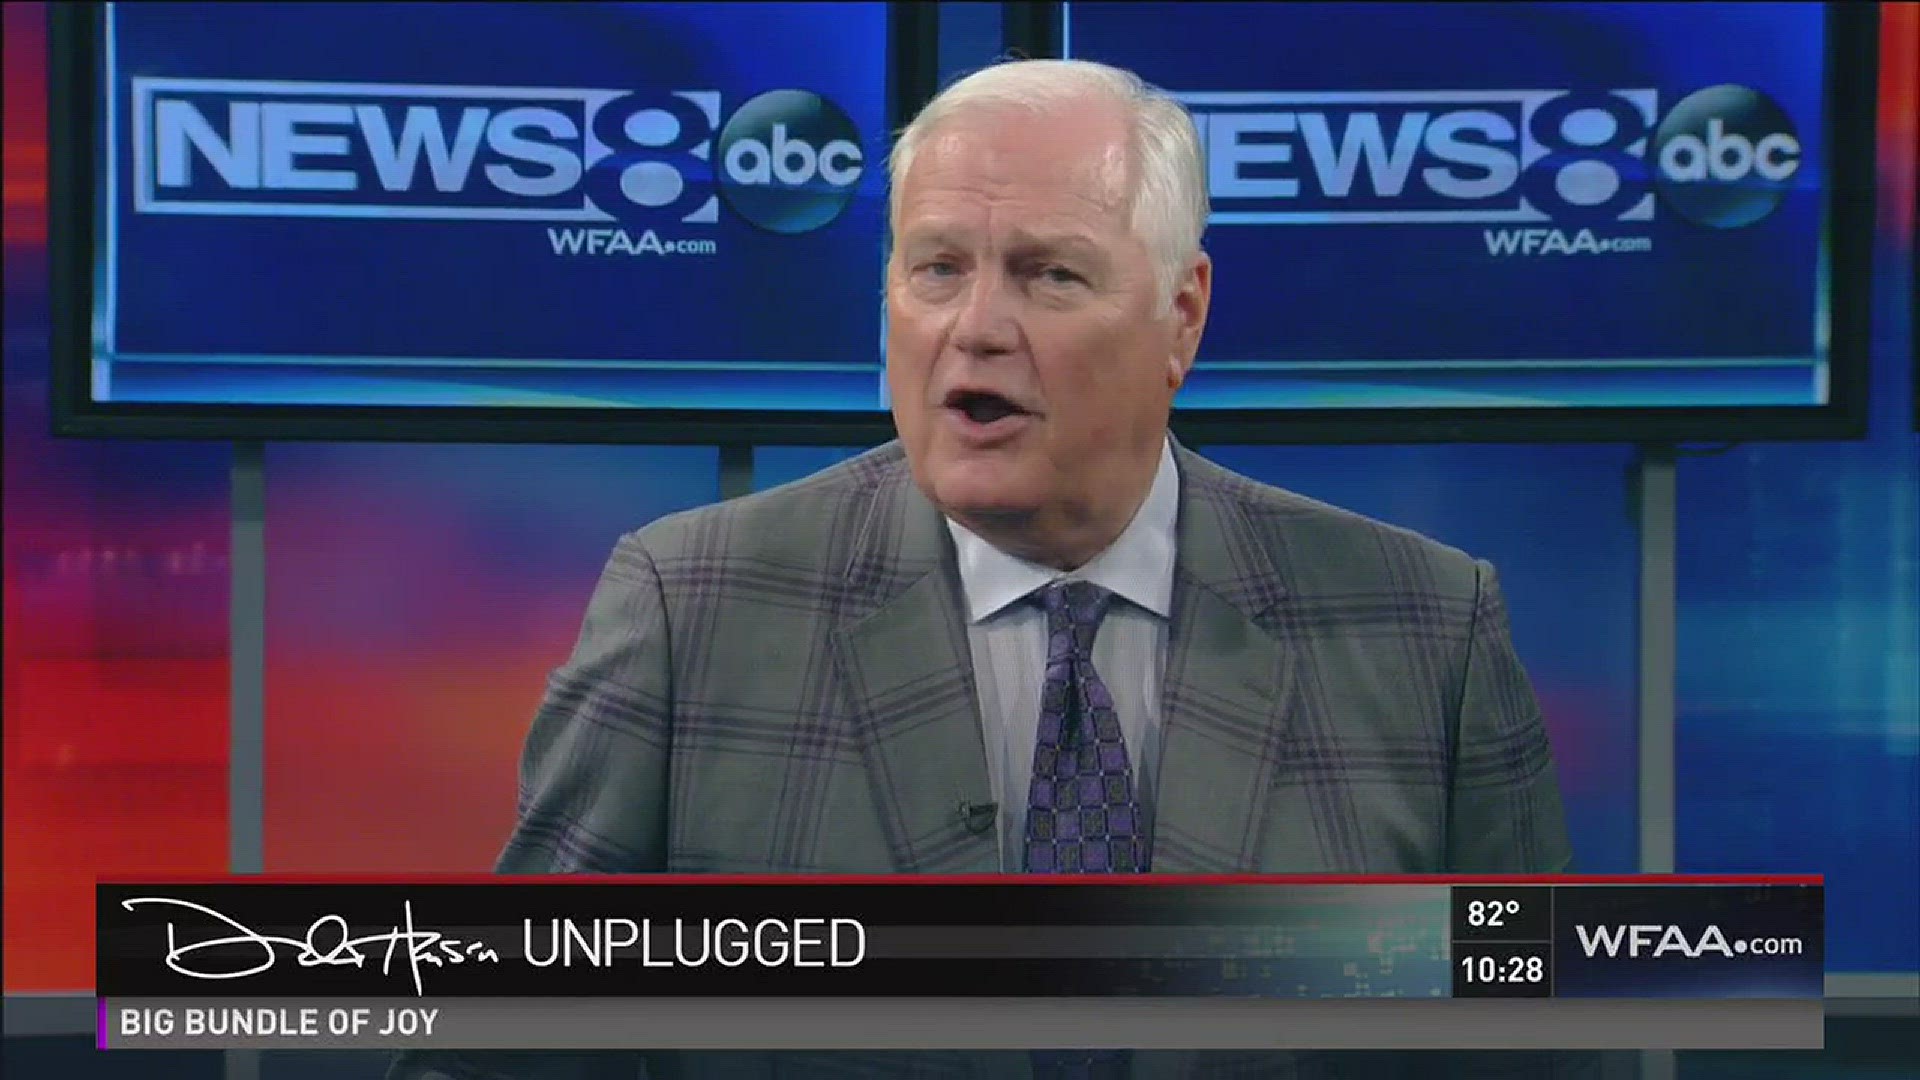 Dale Hansen Unplugged: Briles has failed the women of Baylor